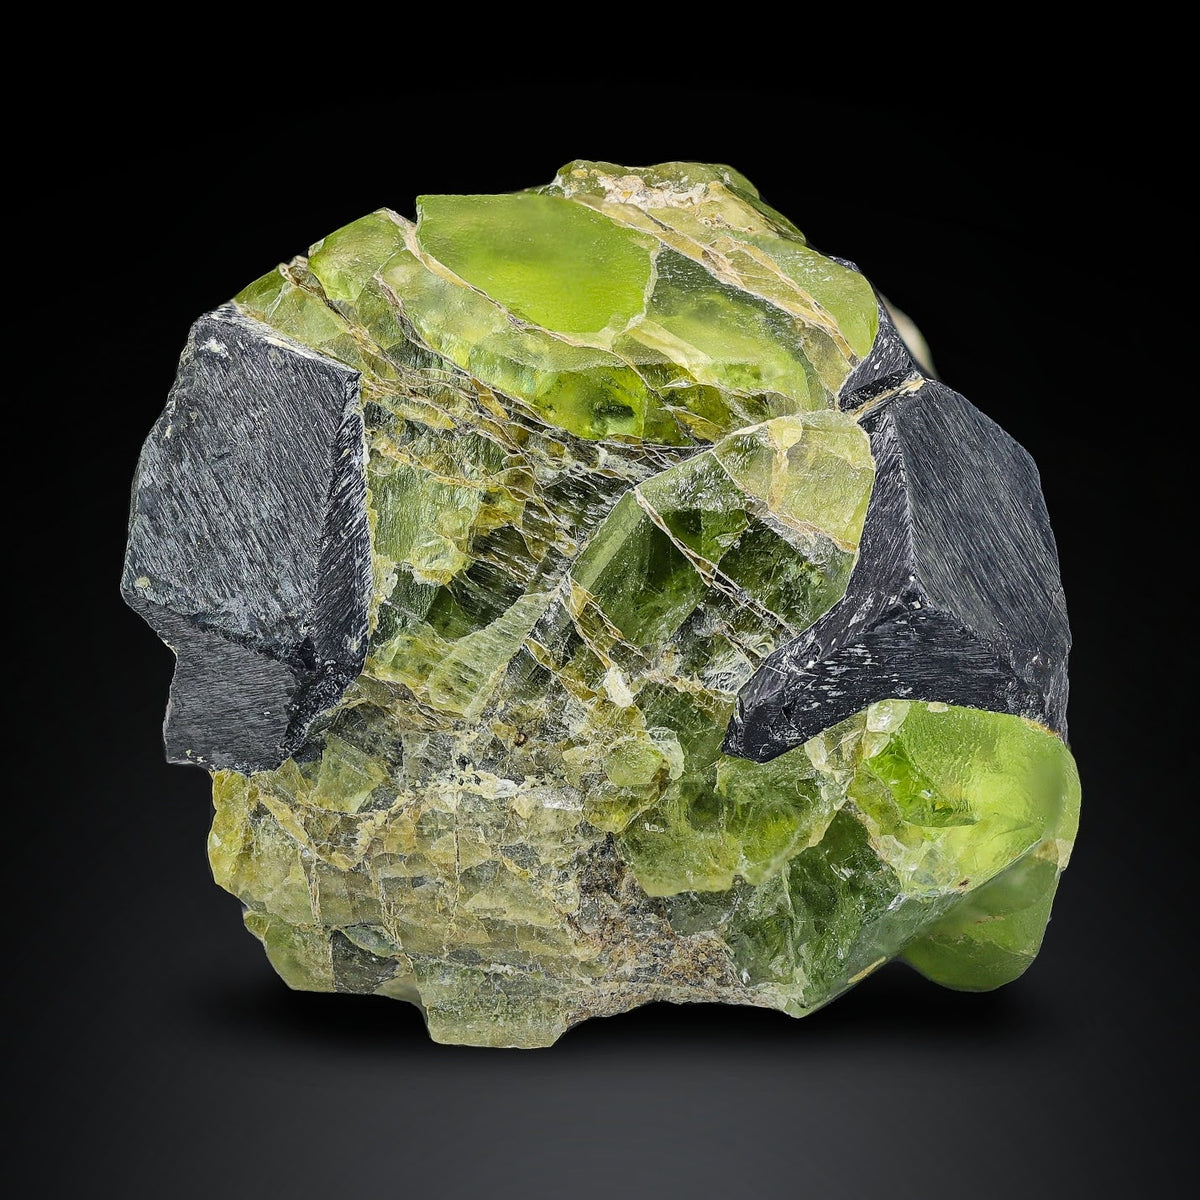 Rare Magnetite Crystals On Peridot